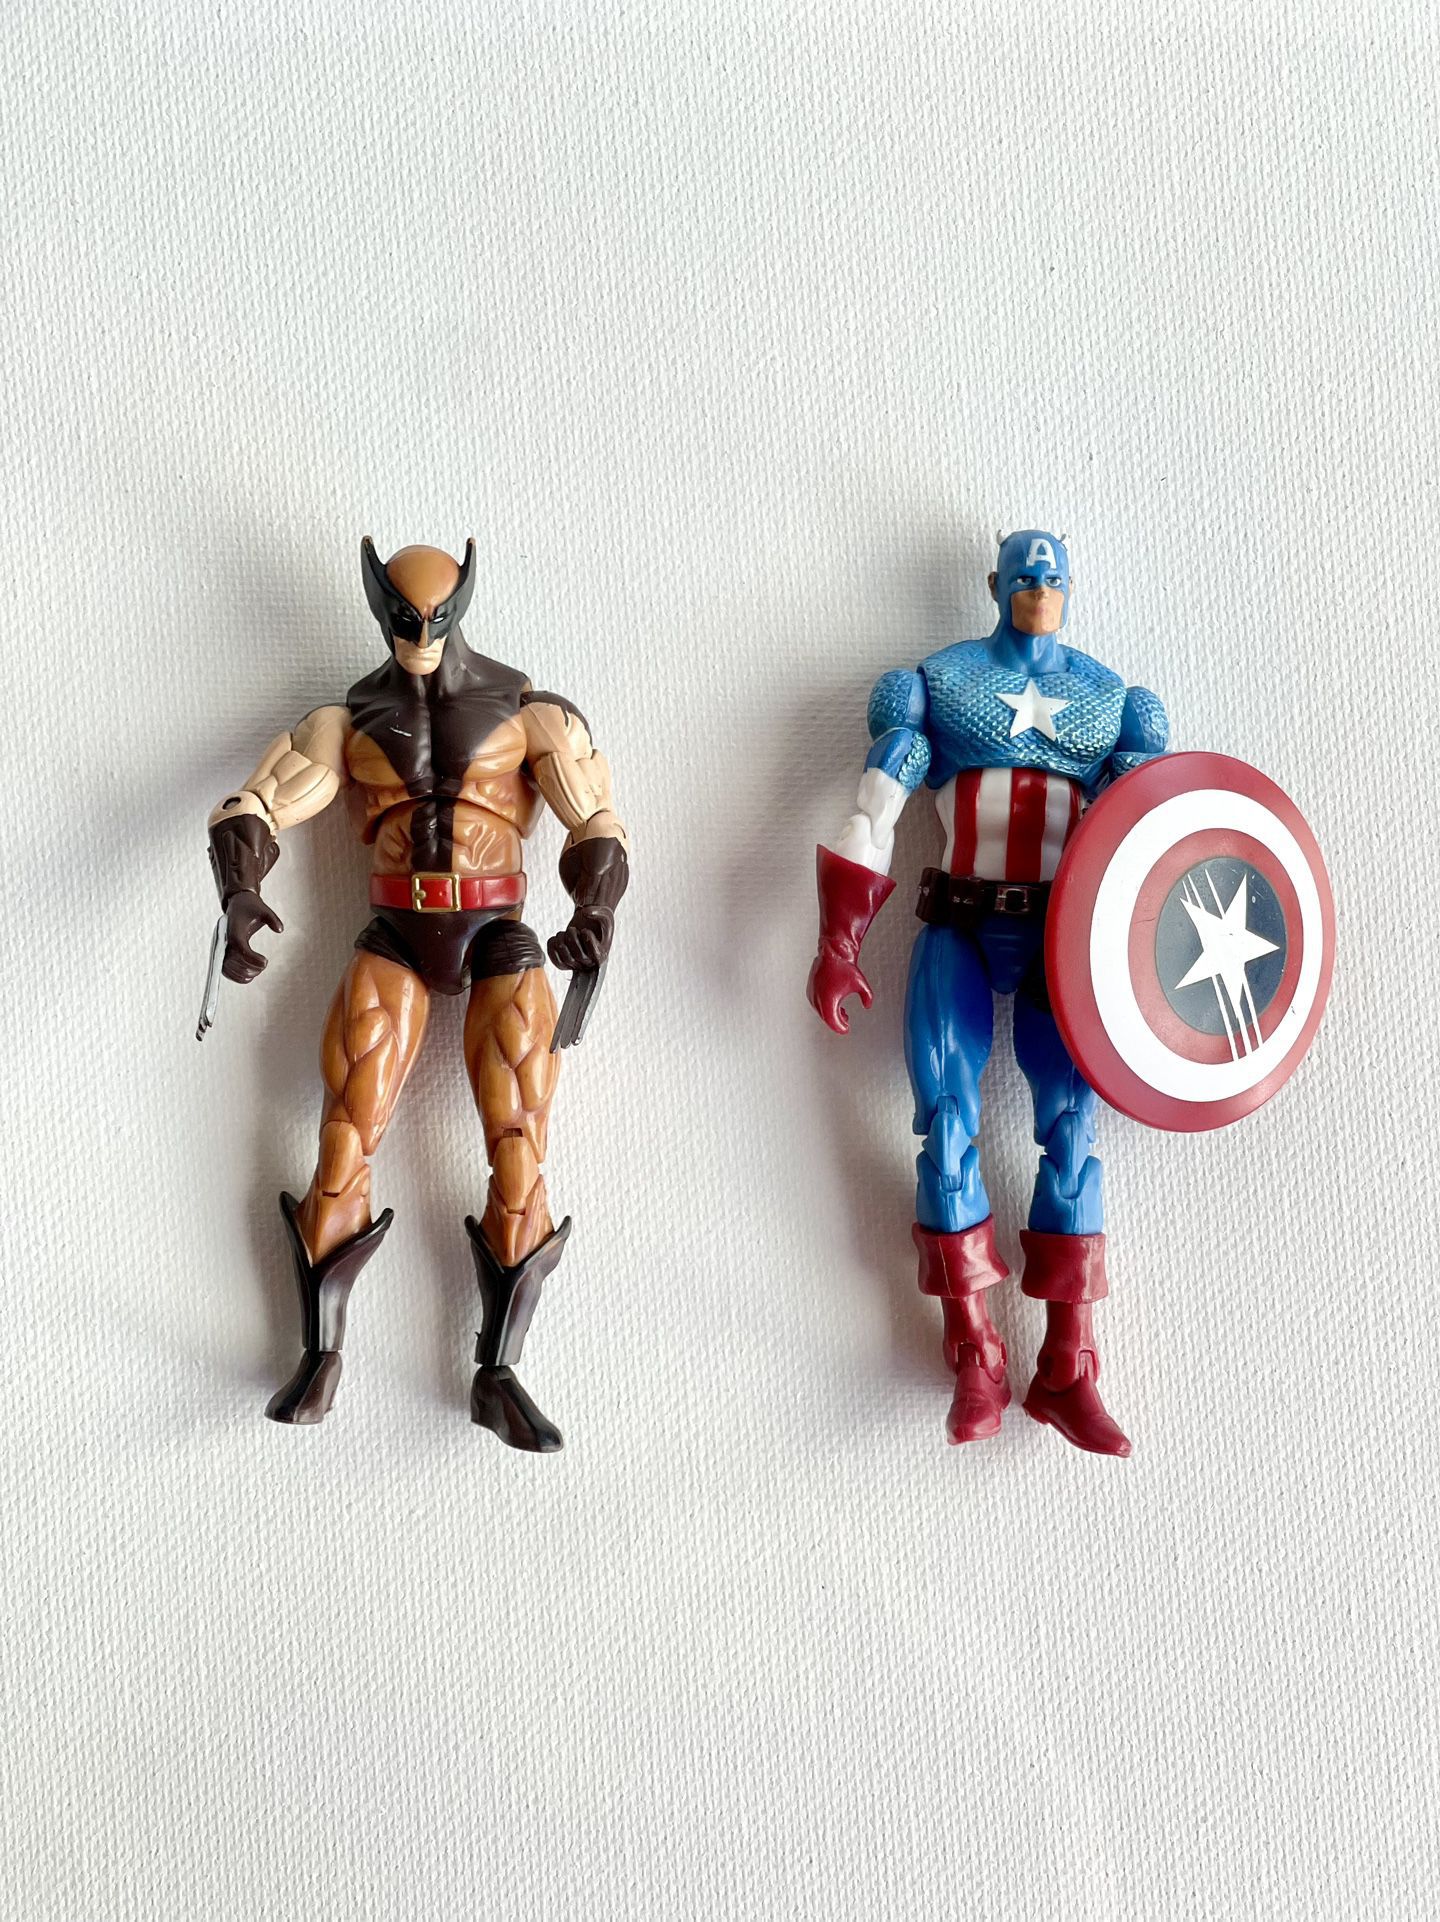 Wolverine & Captain America Marvel Figures Approx  4”H - Sold As Set $30